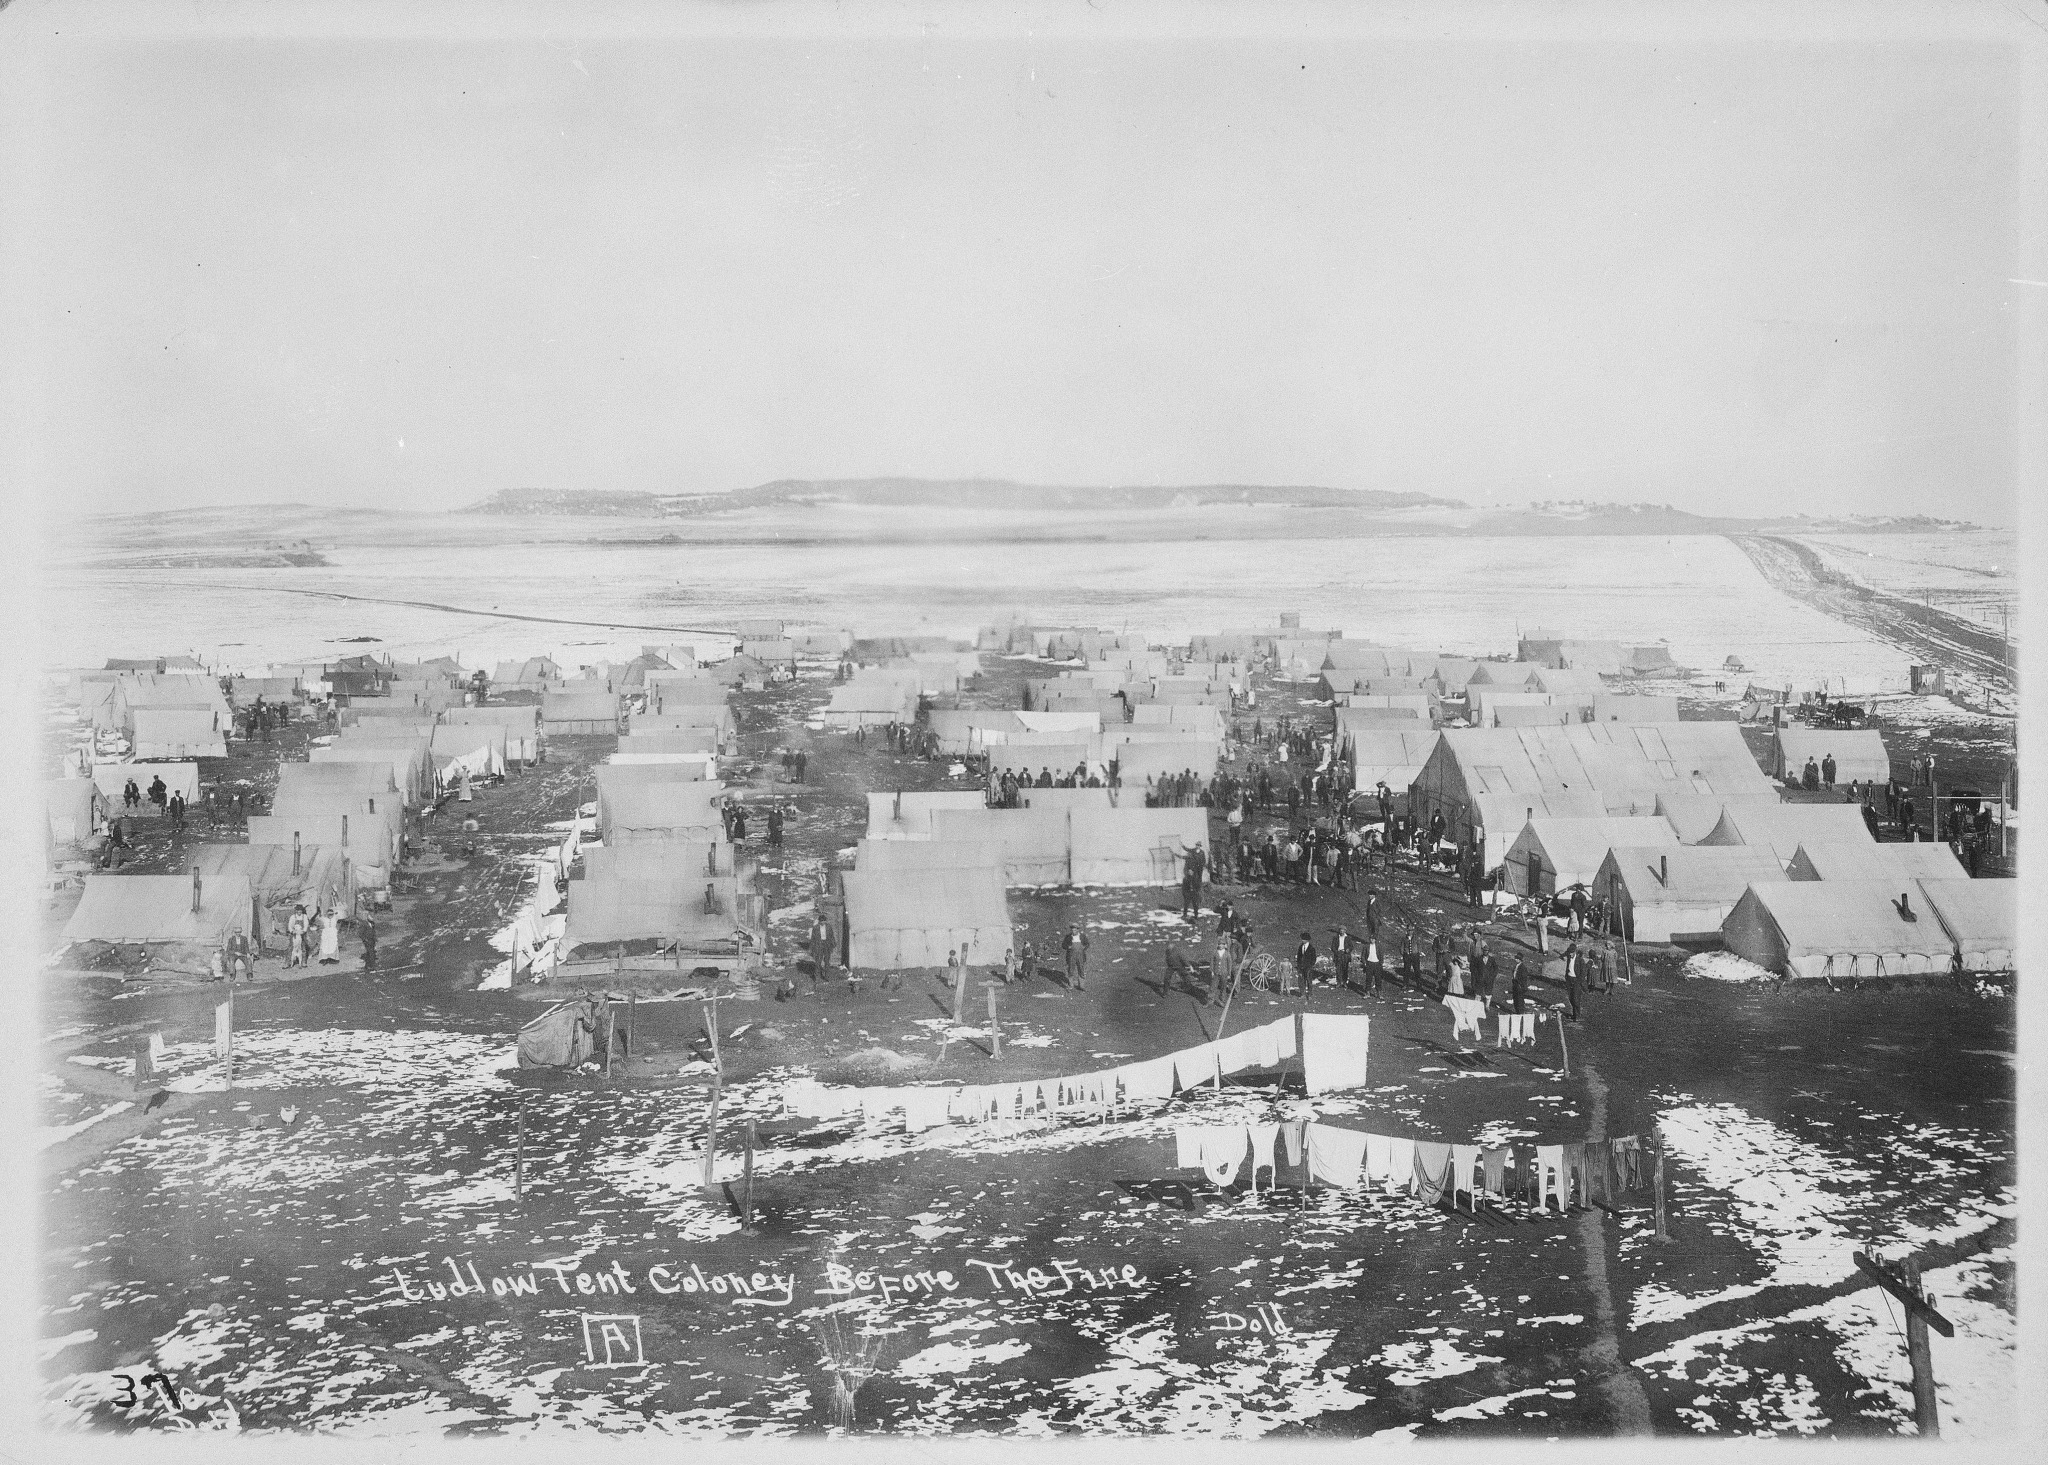 “Ludlow Tent Colony Before the Fire”